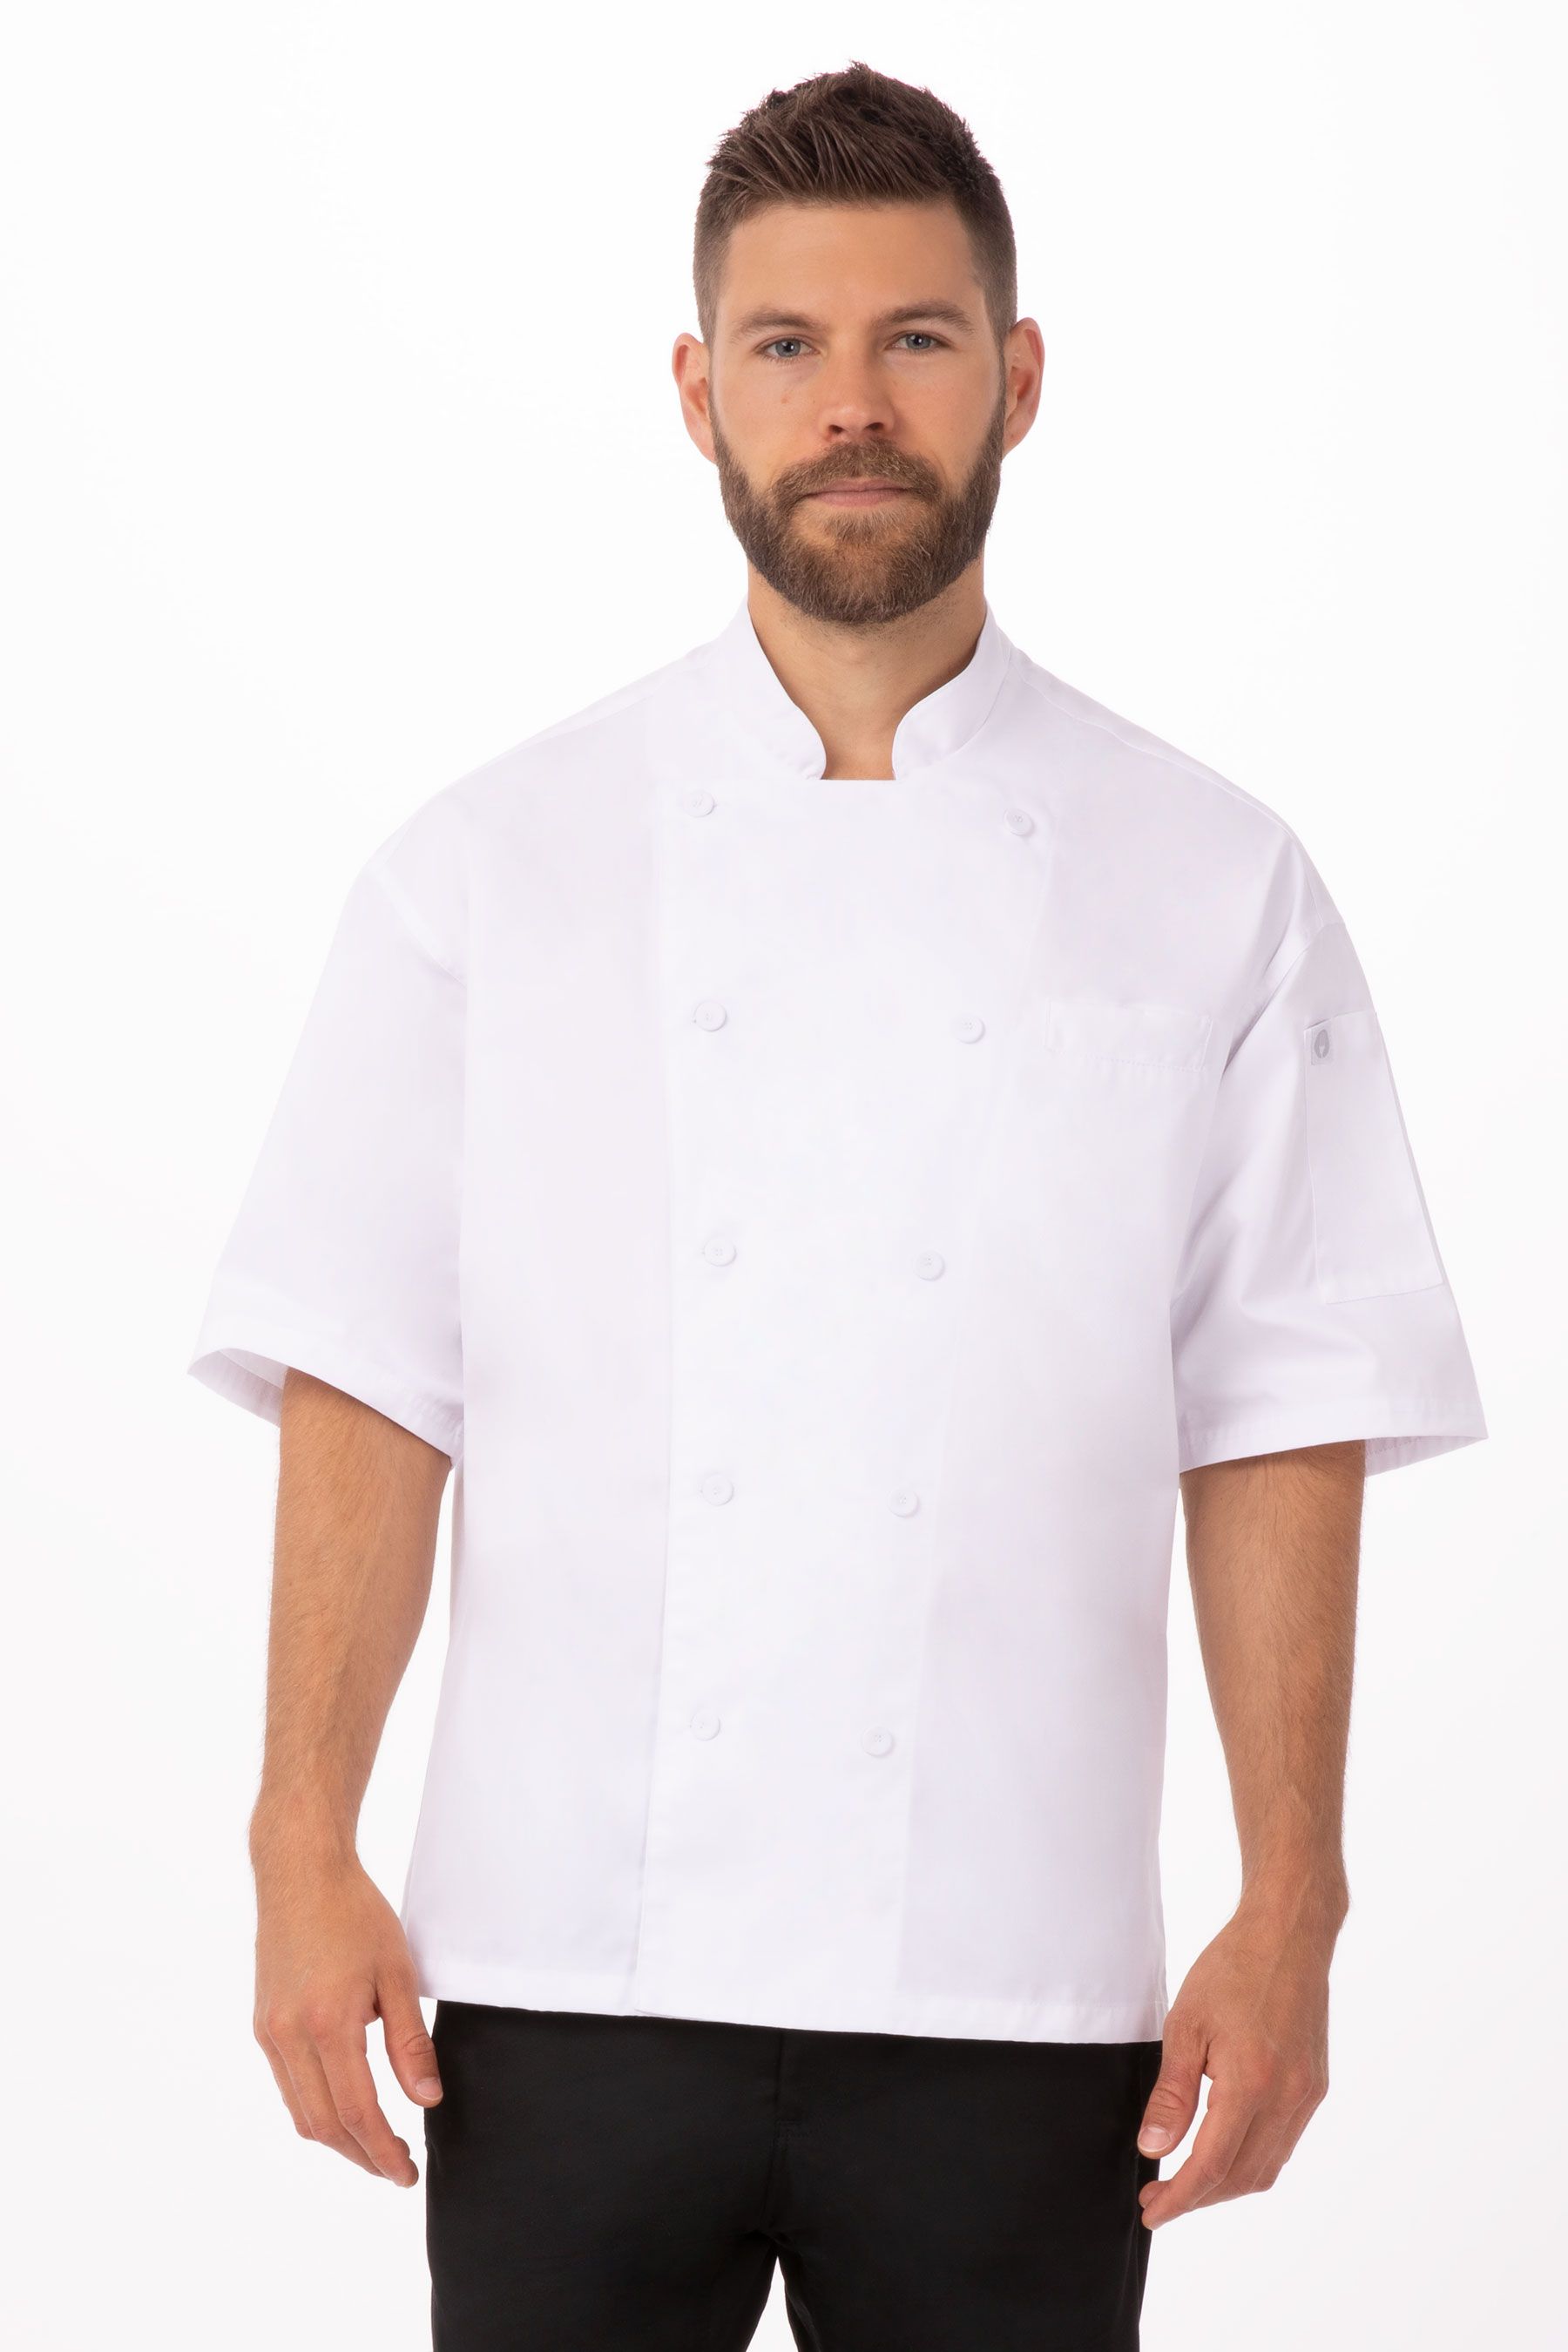 WHITE CHEF JACKET SHORT SLEEVE PALERMO, COOL VENT, EA, 